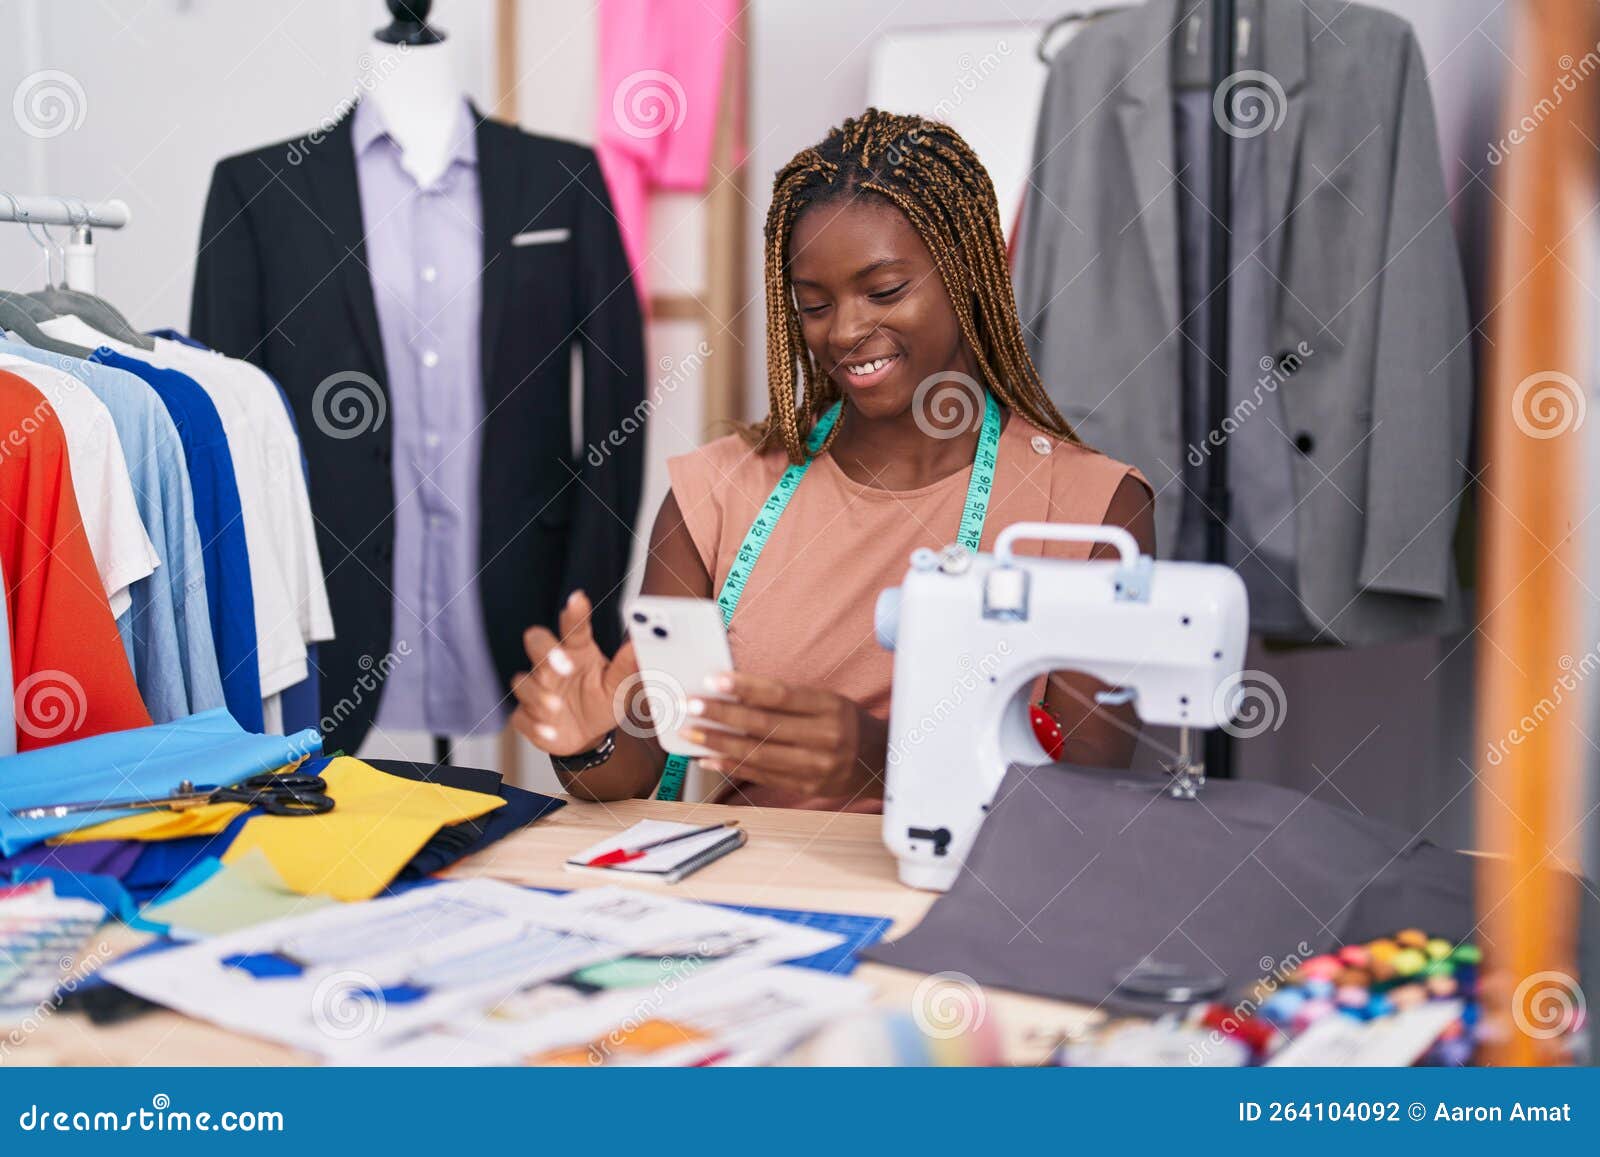 African American Woman Tailor Smiling Confident Using Smartphone at ...